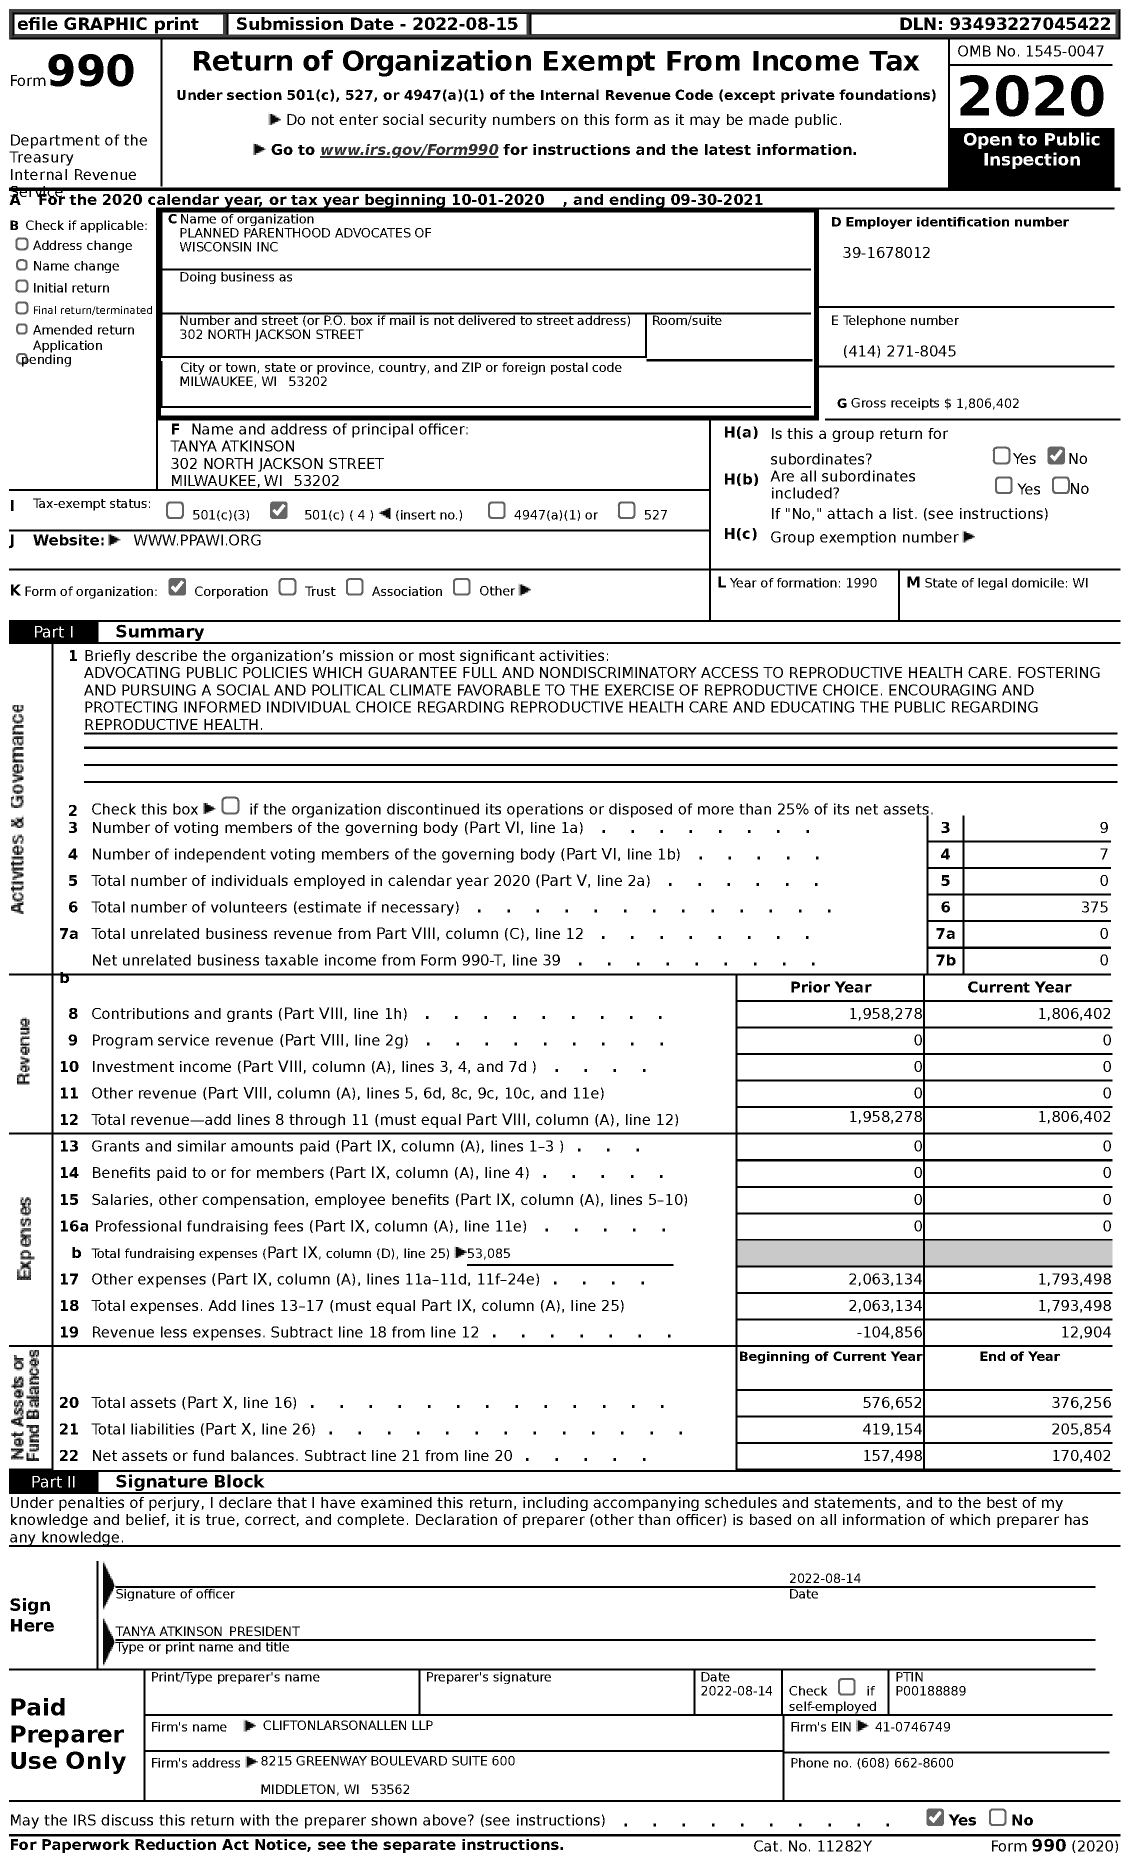 Image of first page of 2020 Form 990 for Planned Parenthood Advocates of Wisconsin